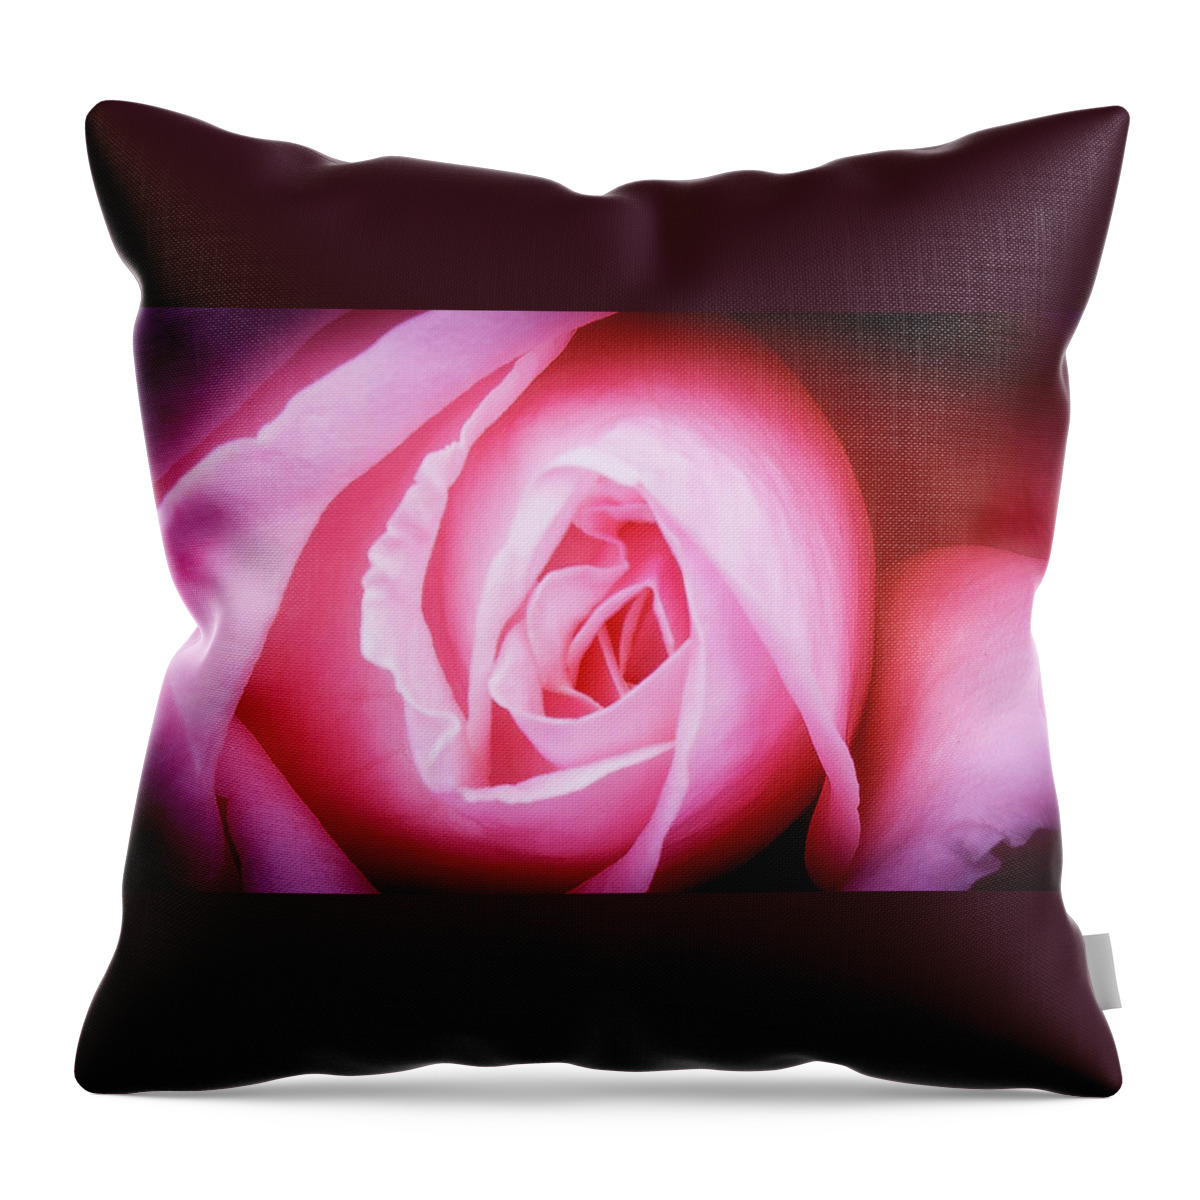 Pink Rose Throw Pillow featuring the photograph Pink Rose by David Morehead